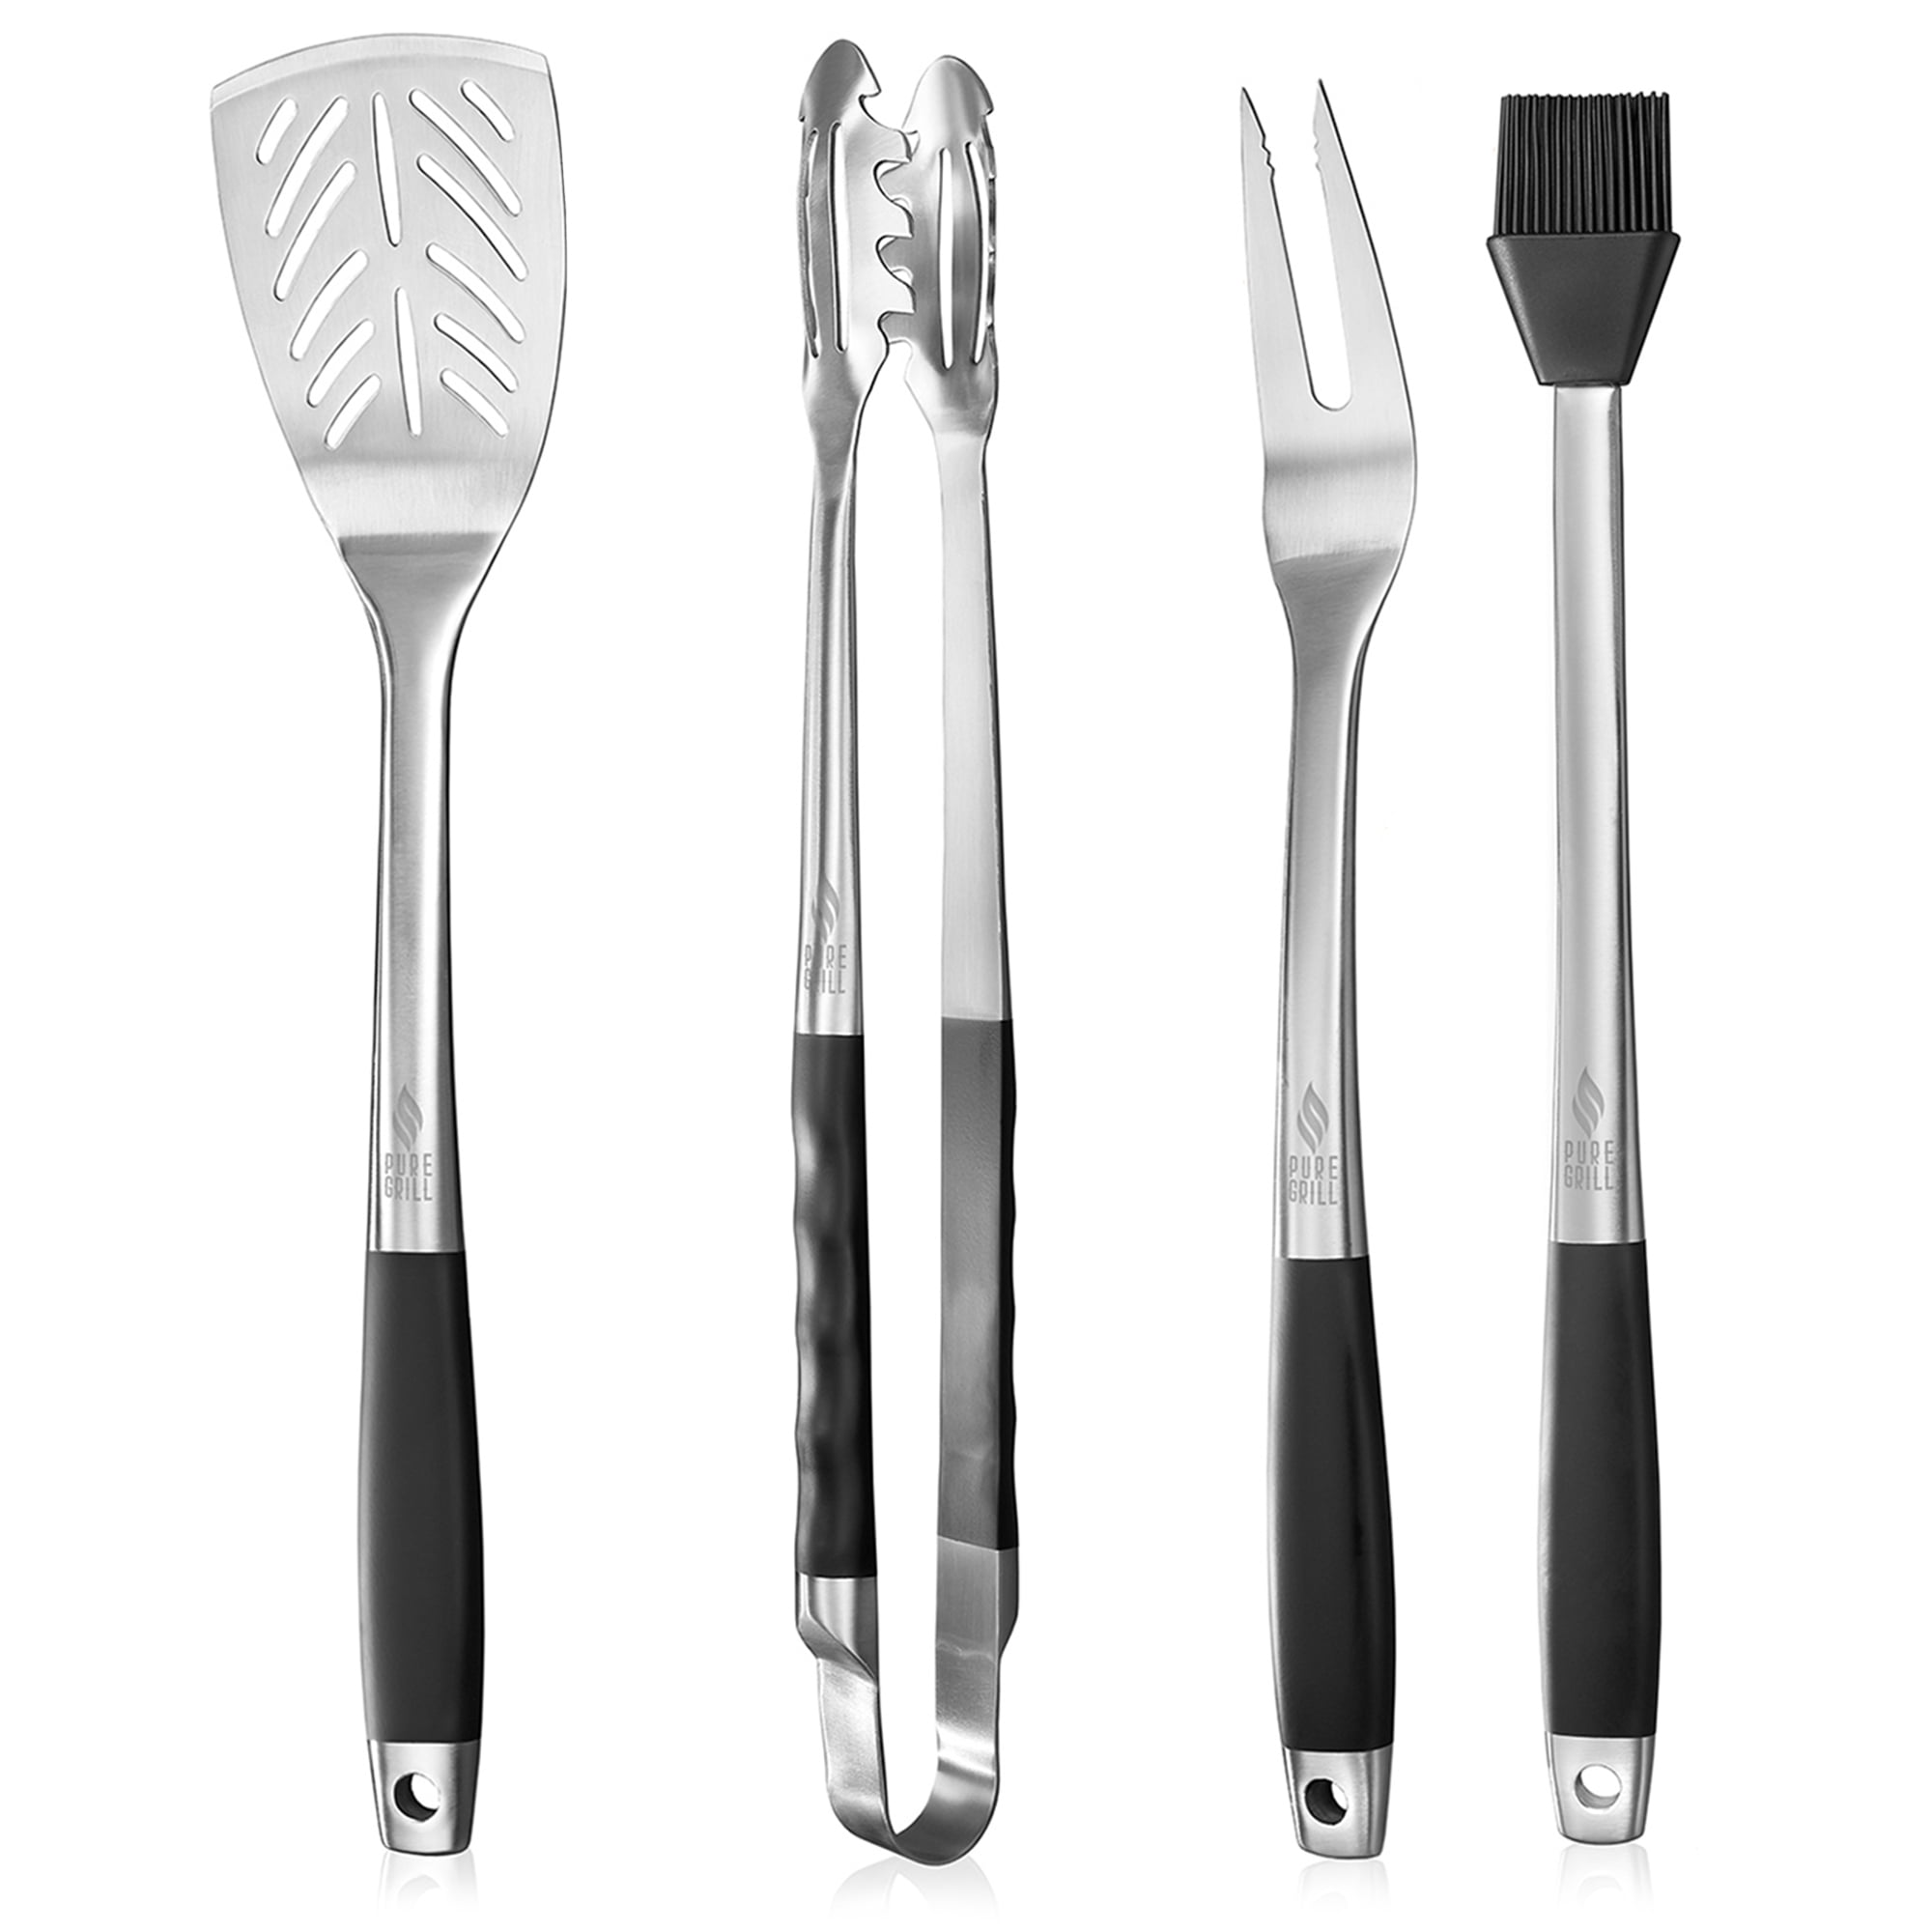 Stainless Steel BBQ Tools Set Barbecue Grilling Utensil Accessories 